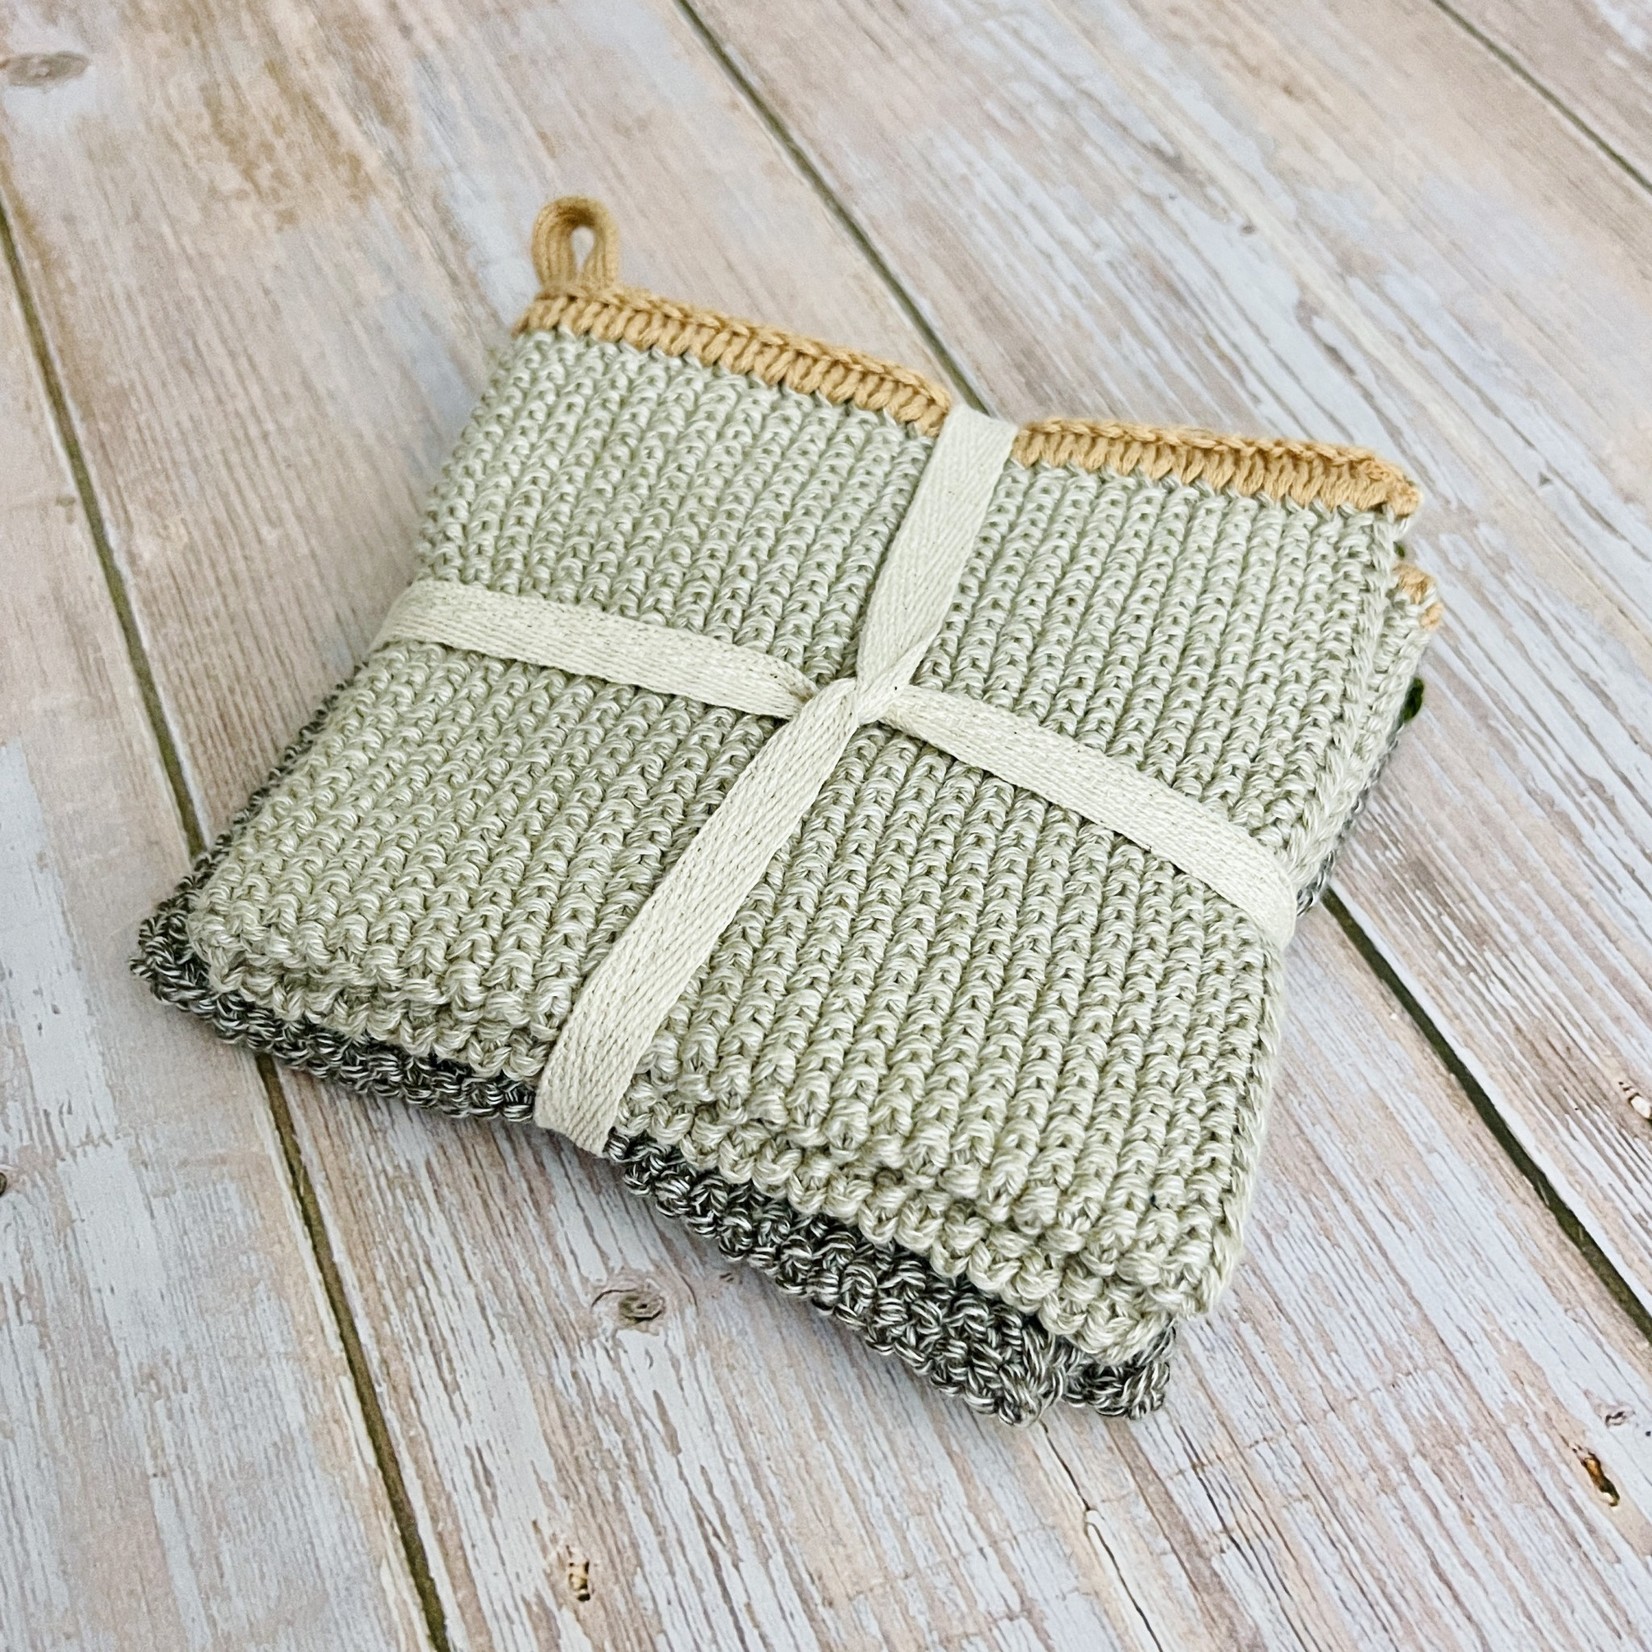 Knit Dish Cloths with Loop, 2 Colors, Set of 2